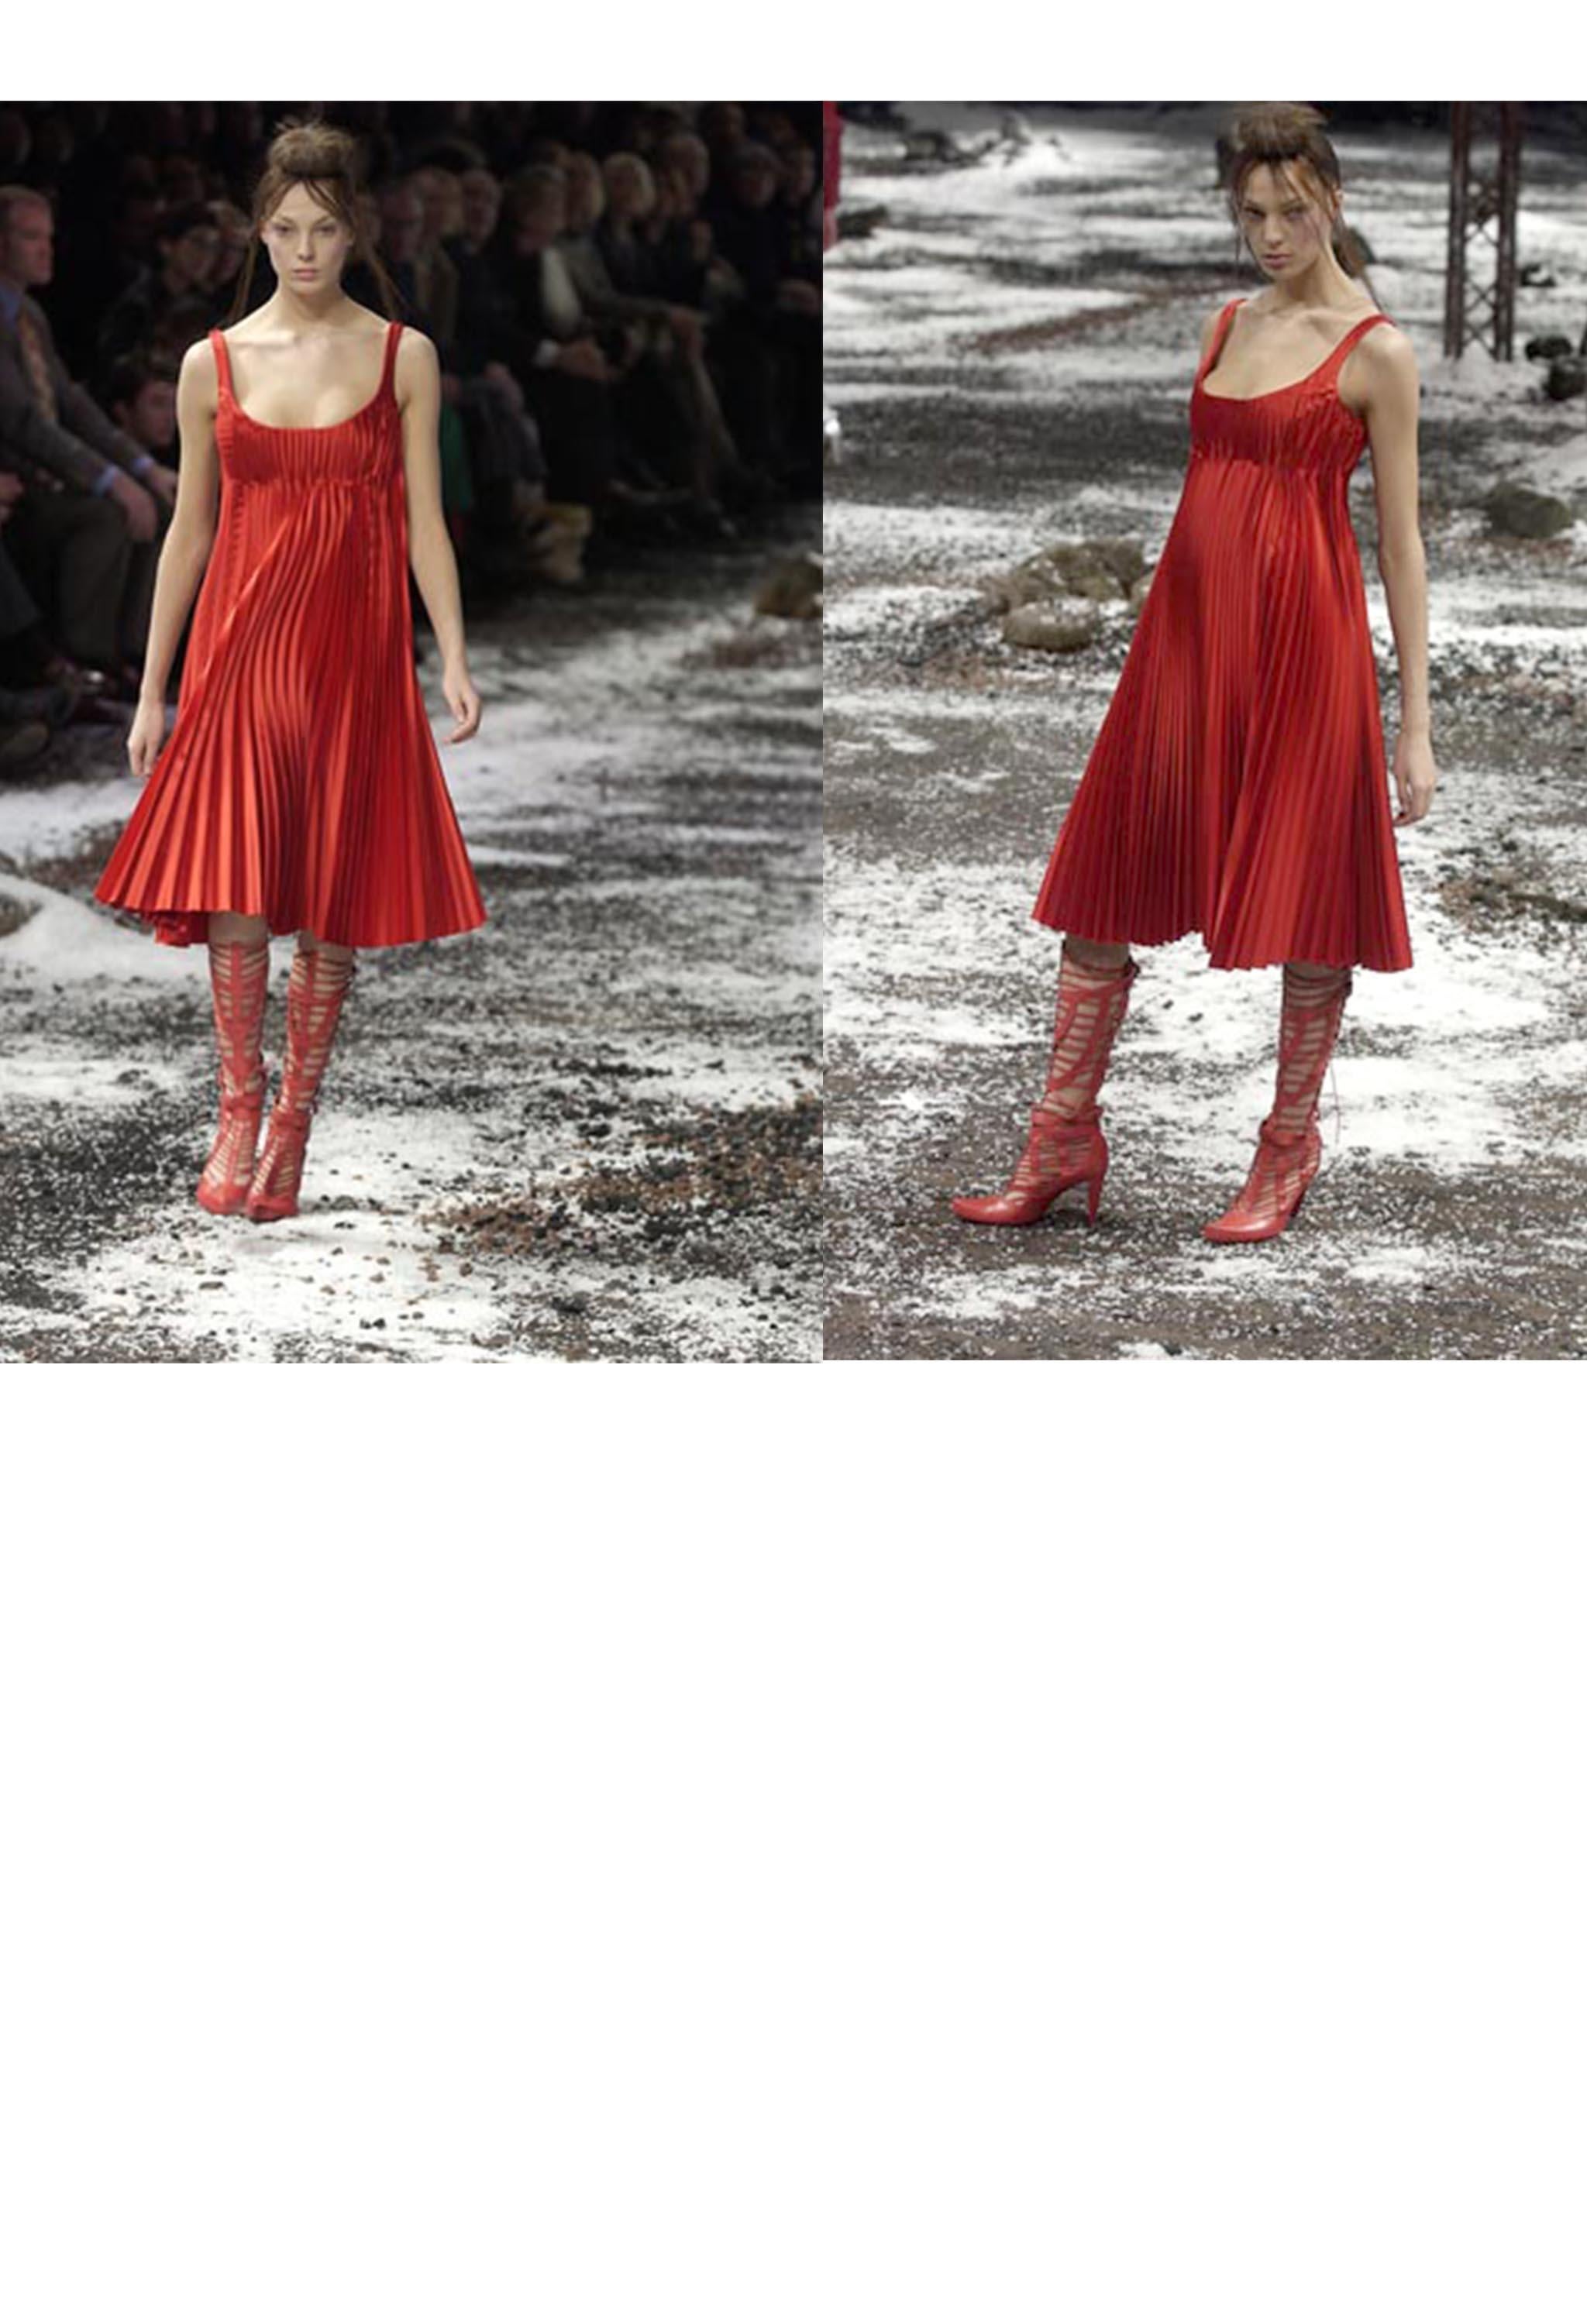 Resurrection Vintage is thrilled to present look #46 from Alexander McQueen's 2003 runway collection, Scanners. The dress boasts sharp knife pleats, an empire body, and an exposed portrait neckline, all perfectly cut in a luxurious heavy red satin.